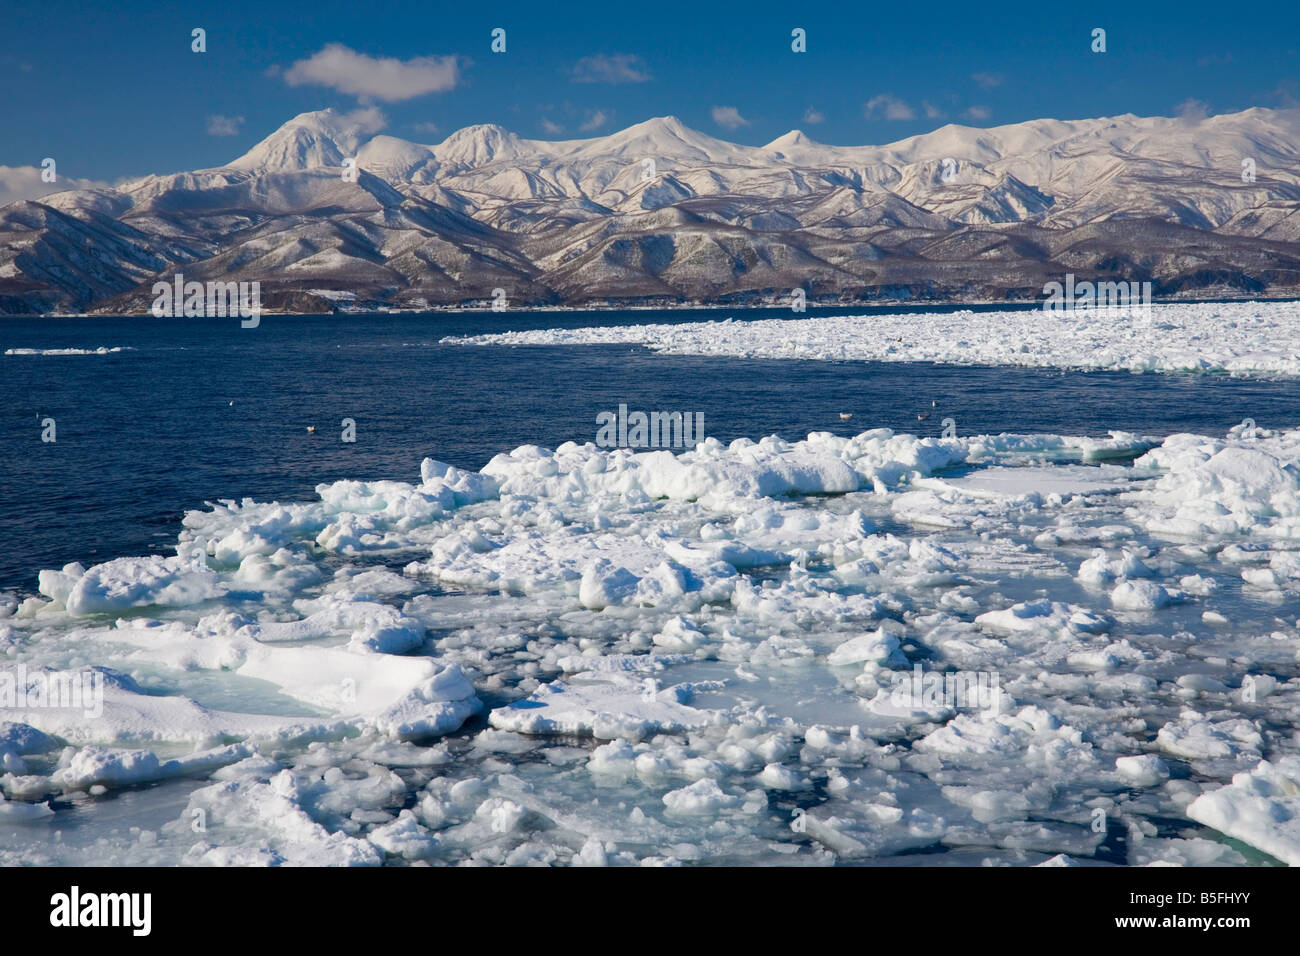 Hokkaido Japan: Ice floes in the Strait of Nemuro with the snow covered mountains of the Shiretoko Peninsula in the distance Stock Photo